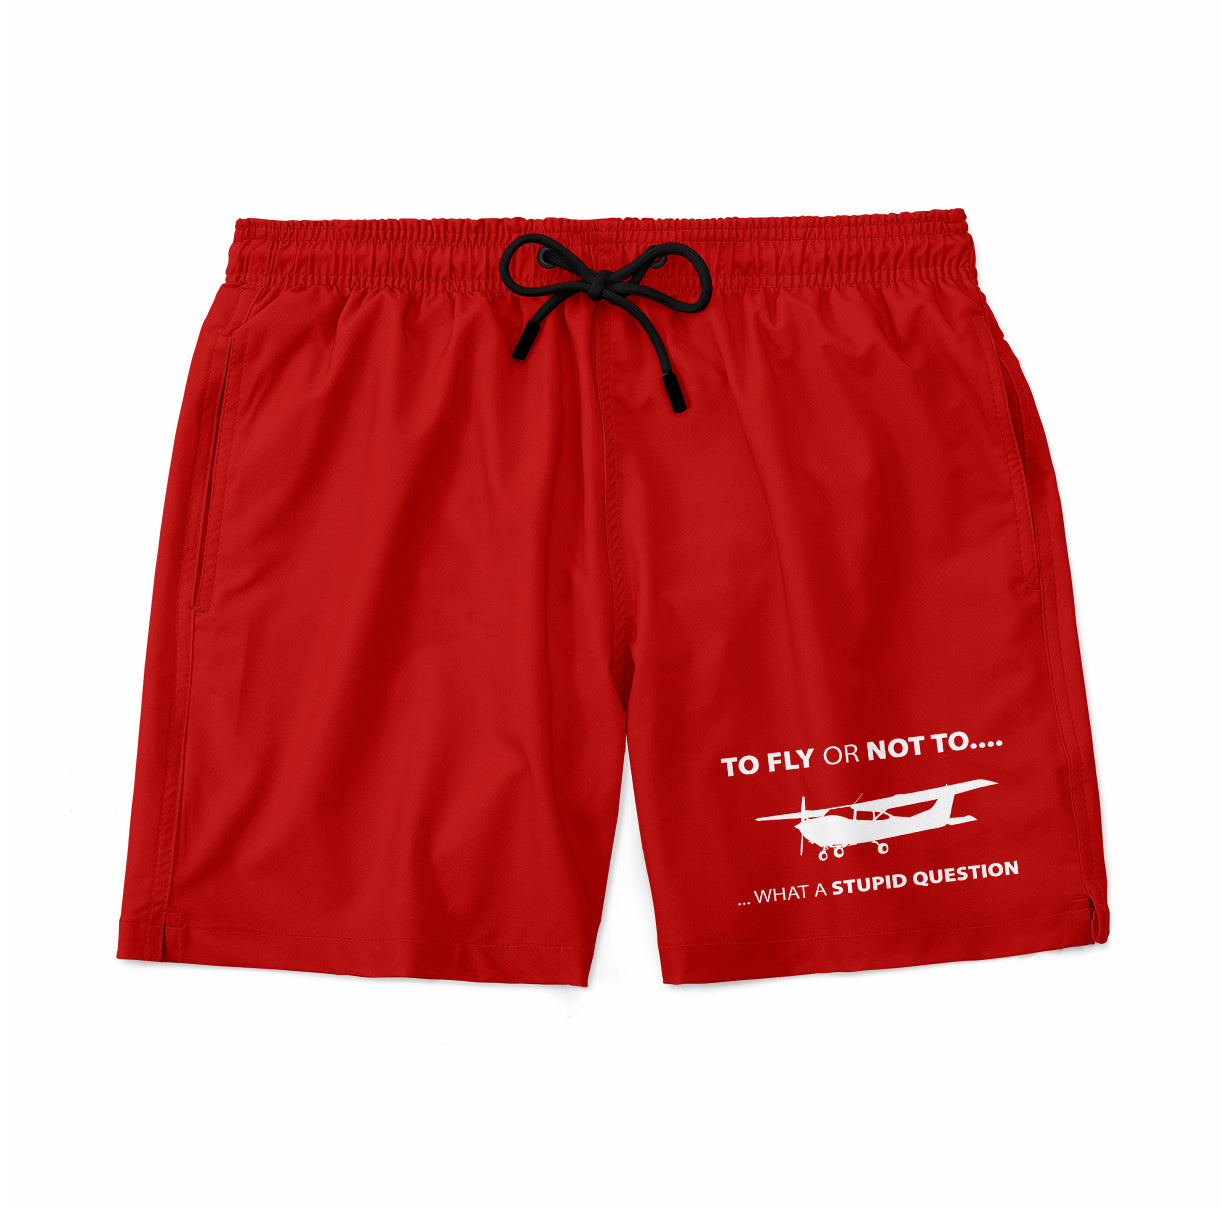 To Fly or Not To What a Stupid Question Designed Swim Trunks & Shorts